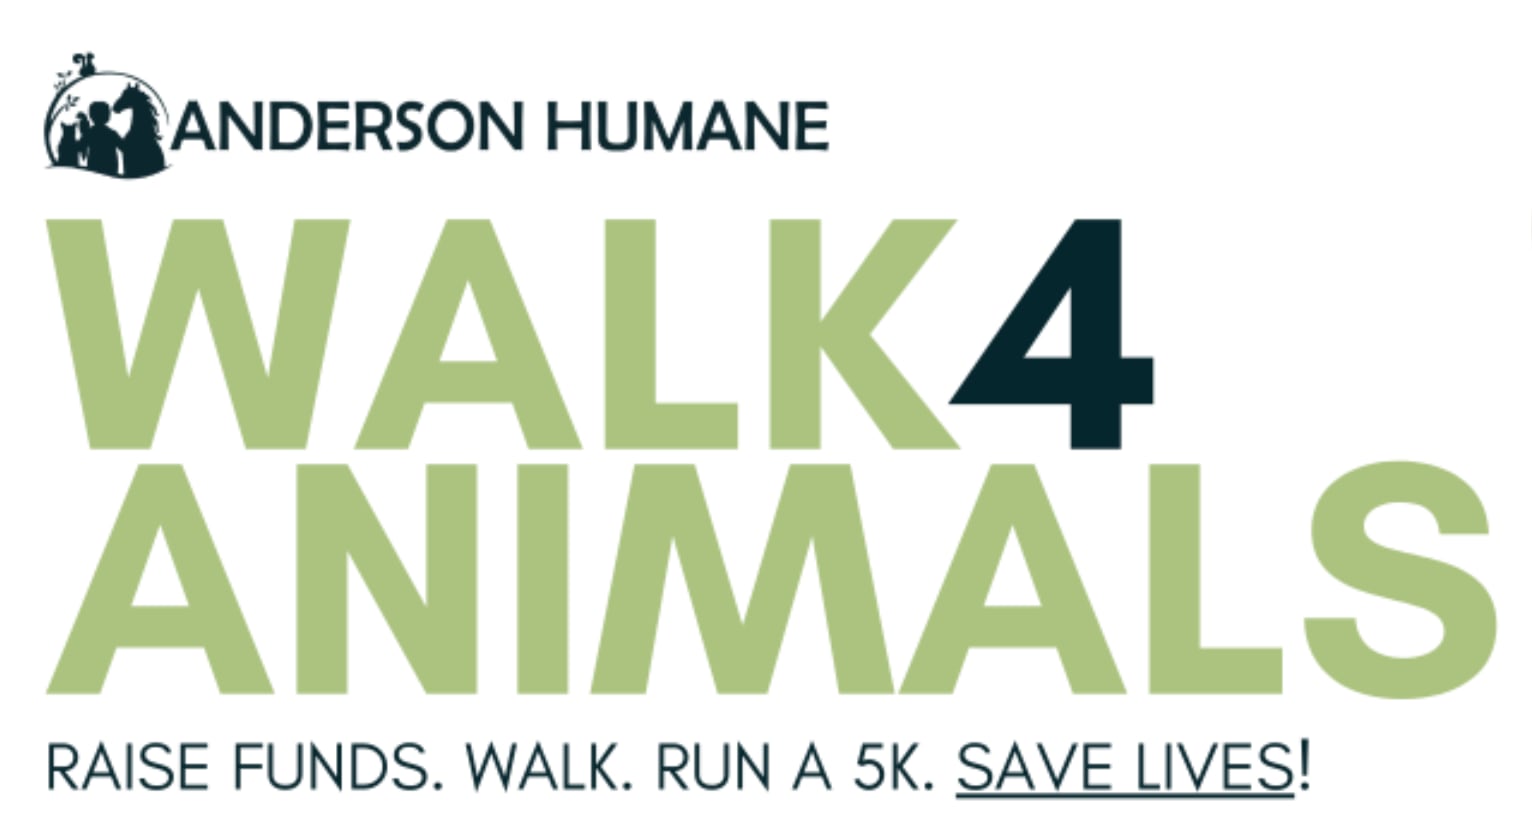 Anderson Humane in Batavia to host walk and 5K to benefit animal rescue